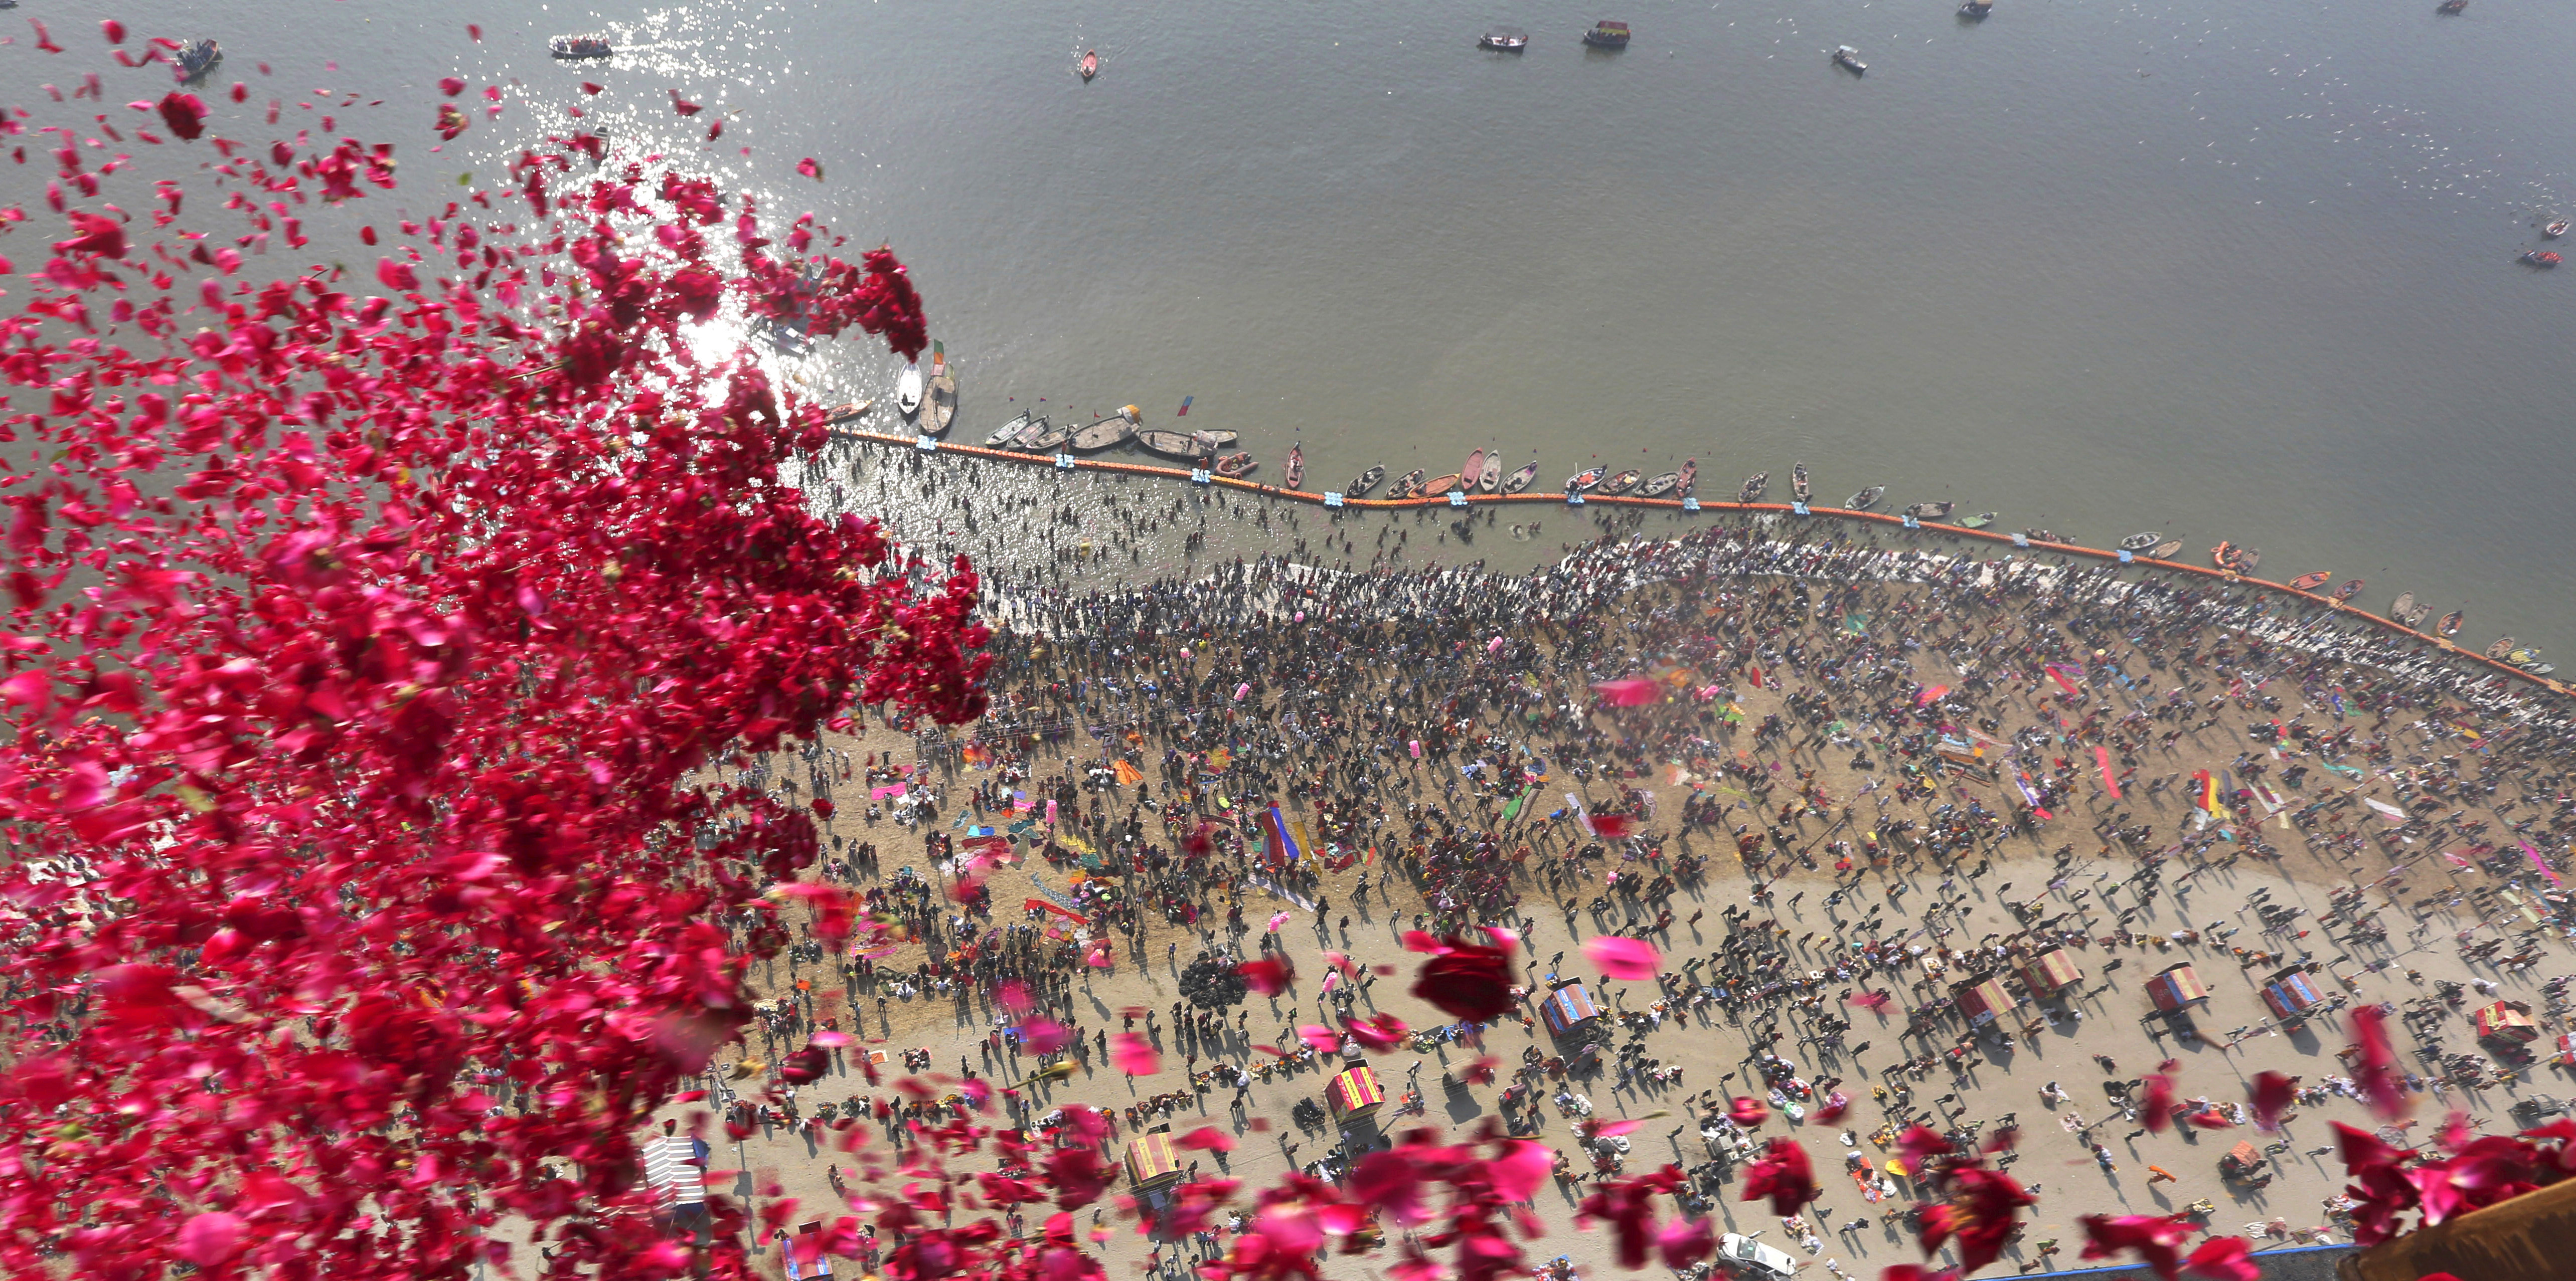 Uttar Pradesh government officials throw rose petals from a helicopter on devotees taking ritualist dips at Sangam, on the auspicious day of 